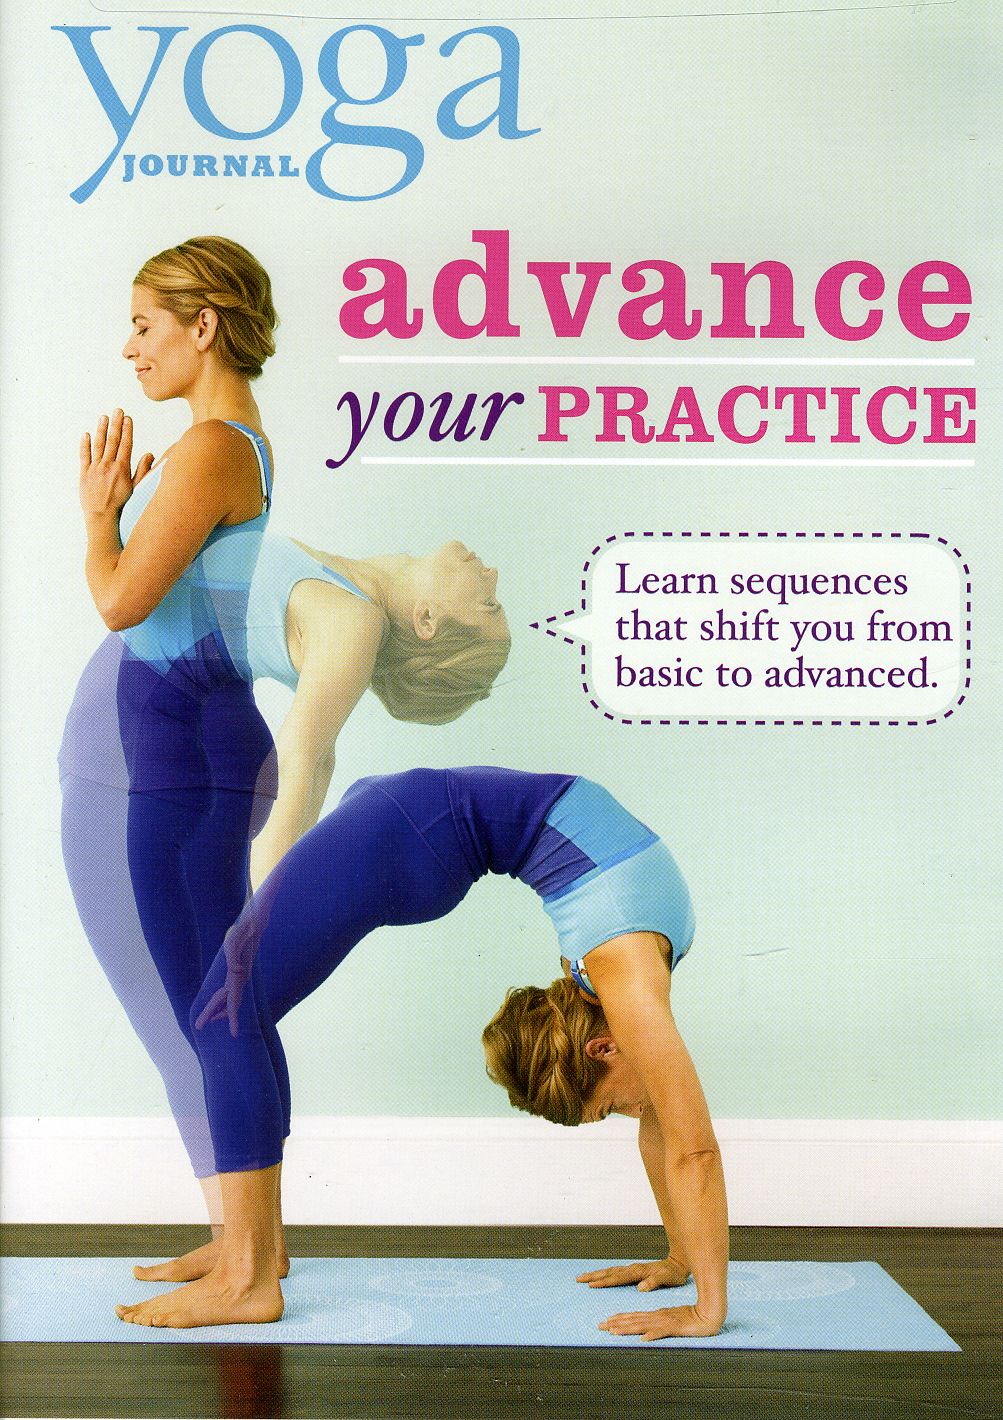 YOGA JOURNAL: ADVANCE YOUR PRACTICE FROM BEGINNER